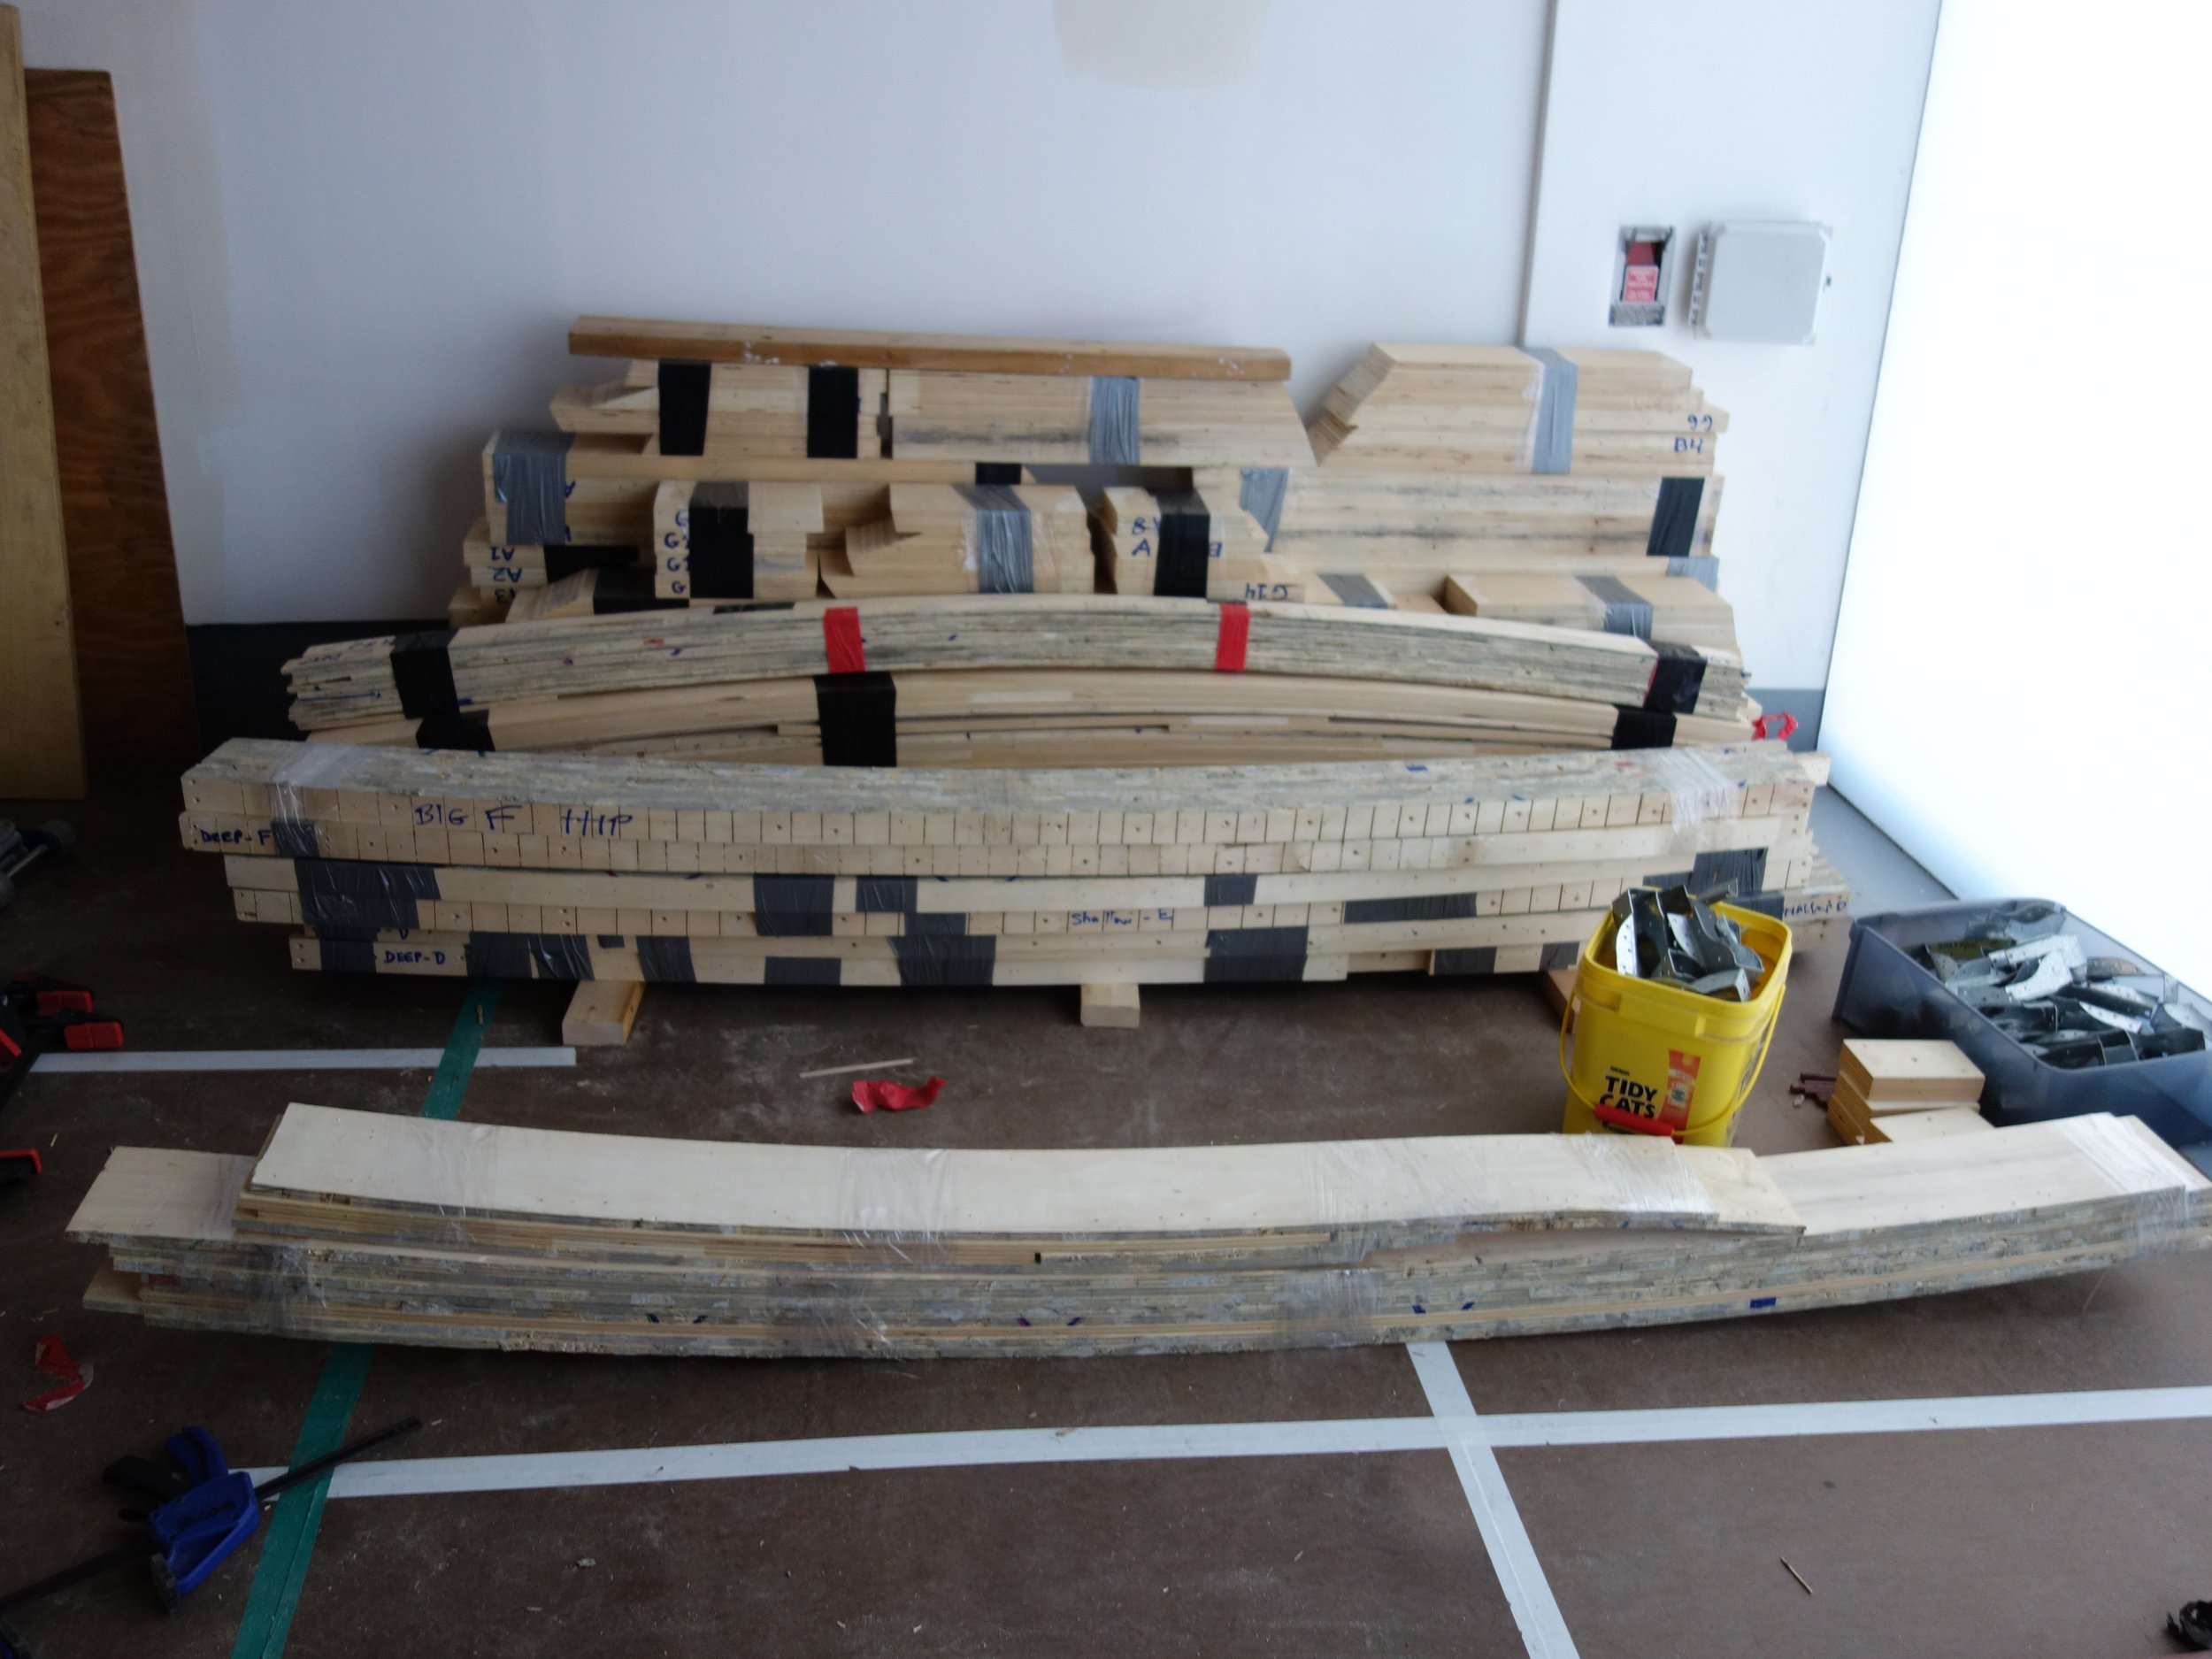  Here are the bundles of ply which will form the deck joists and the spandrel, which is the curved beam that will surround the perimeter of the bowl. 